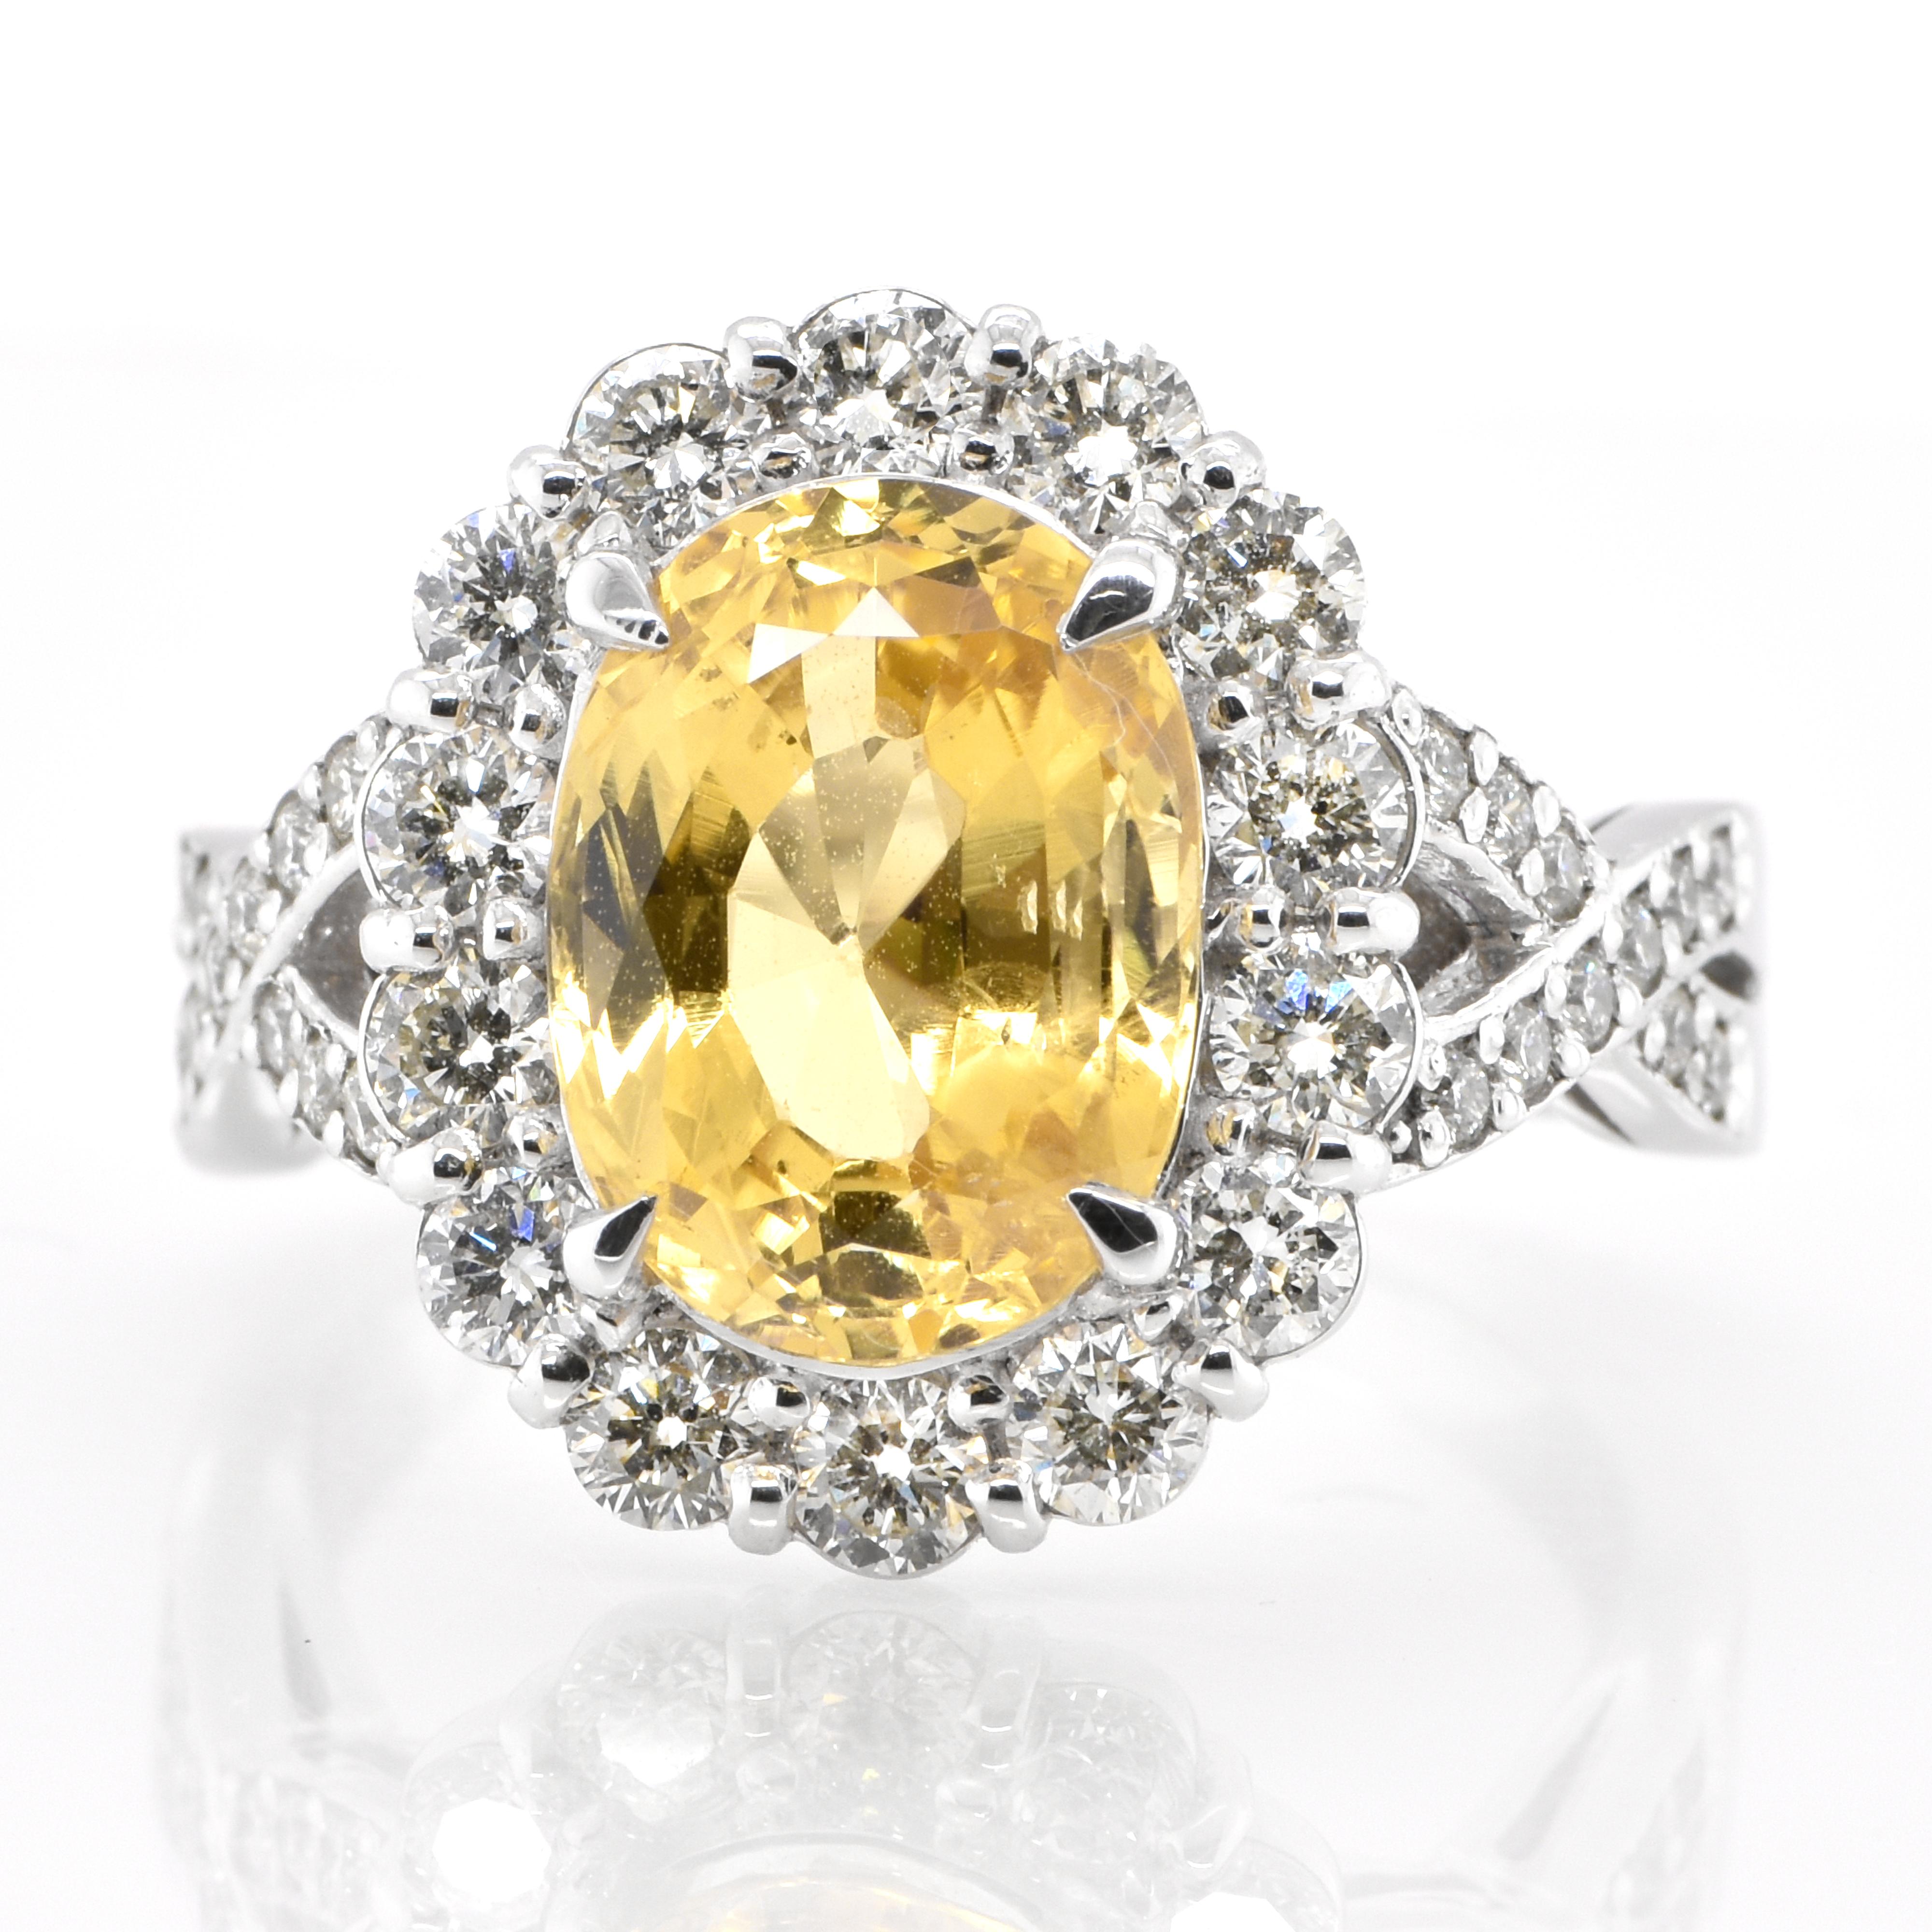 A beautiful ring featuring GIA Certified 4.90 Carat Natural, Yellow Sapphire and 1.17 Carats Diamond Accents set in Platinum. Sapphires have extraordinary durability - they excel in hardness as well as toughness and durability making them very